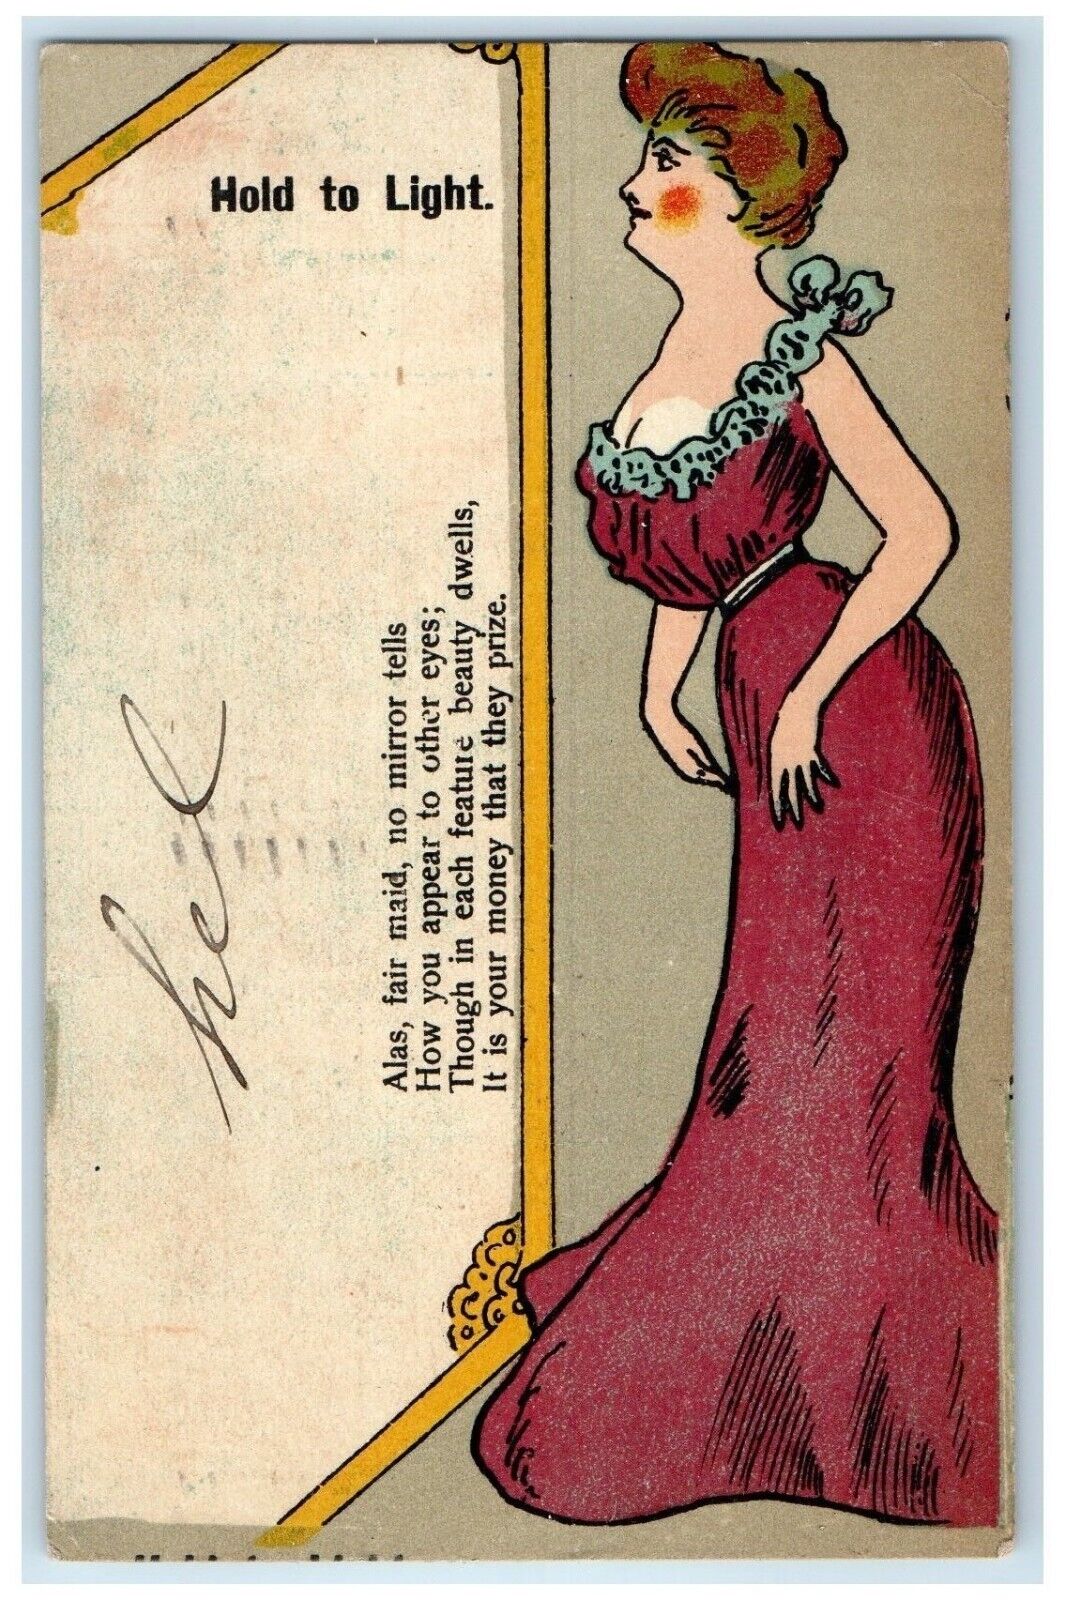 1907 Pretty Woman Dress Hold To Light HTL New York NY Posted Antique Postcard